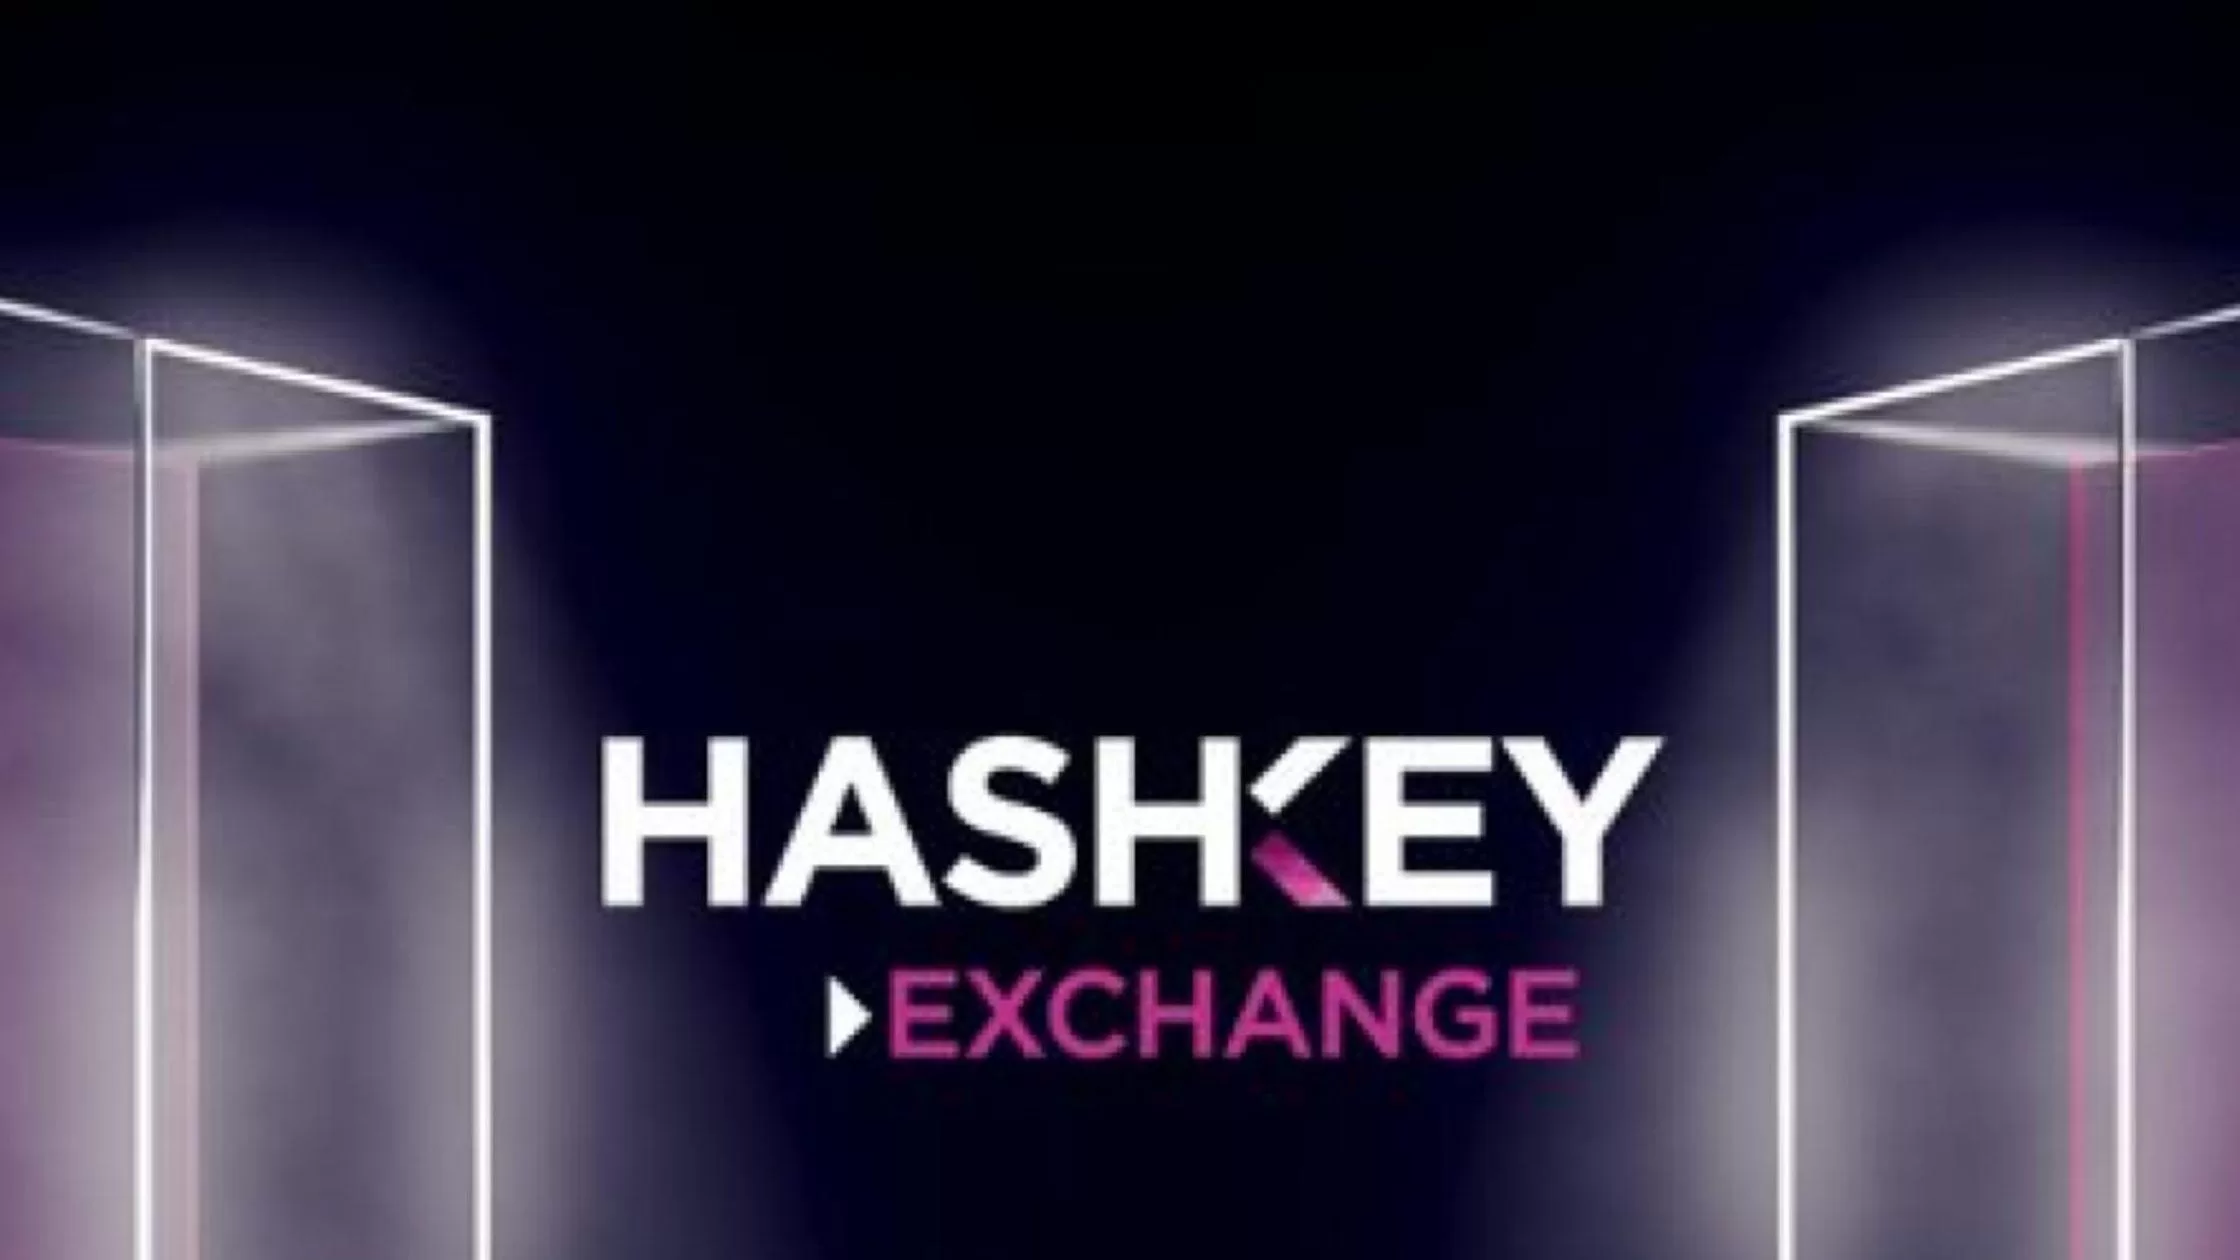 HashKey Exchange Becomes Hong Kongs First Licensed Crypto Trading Platform